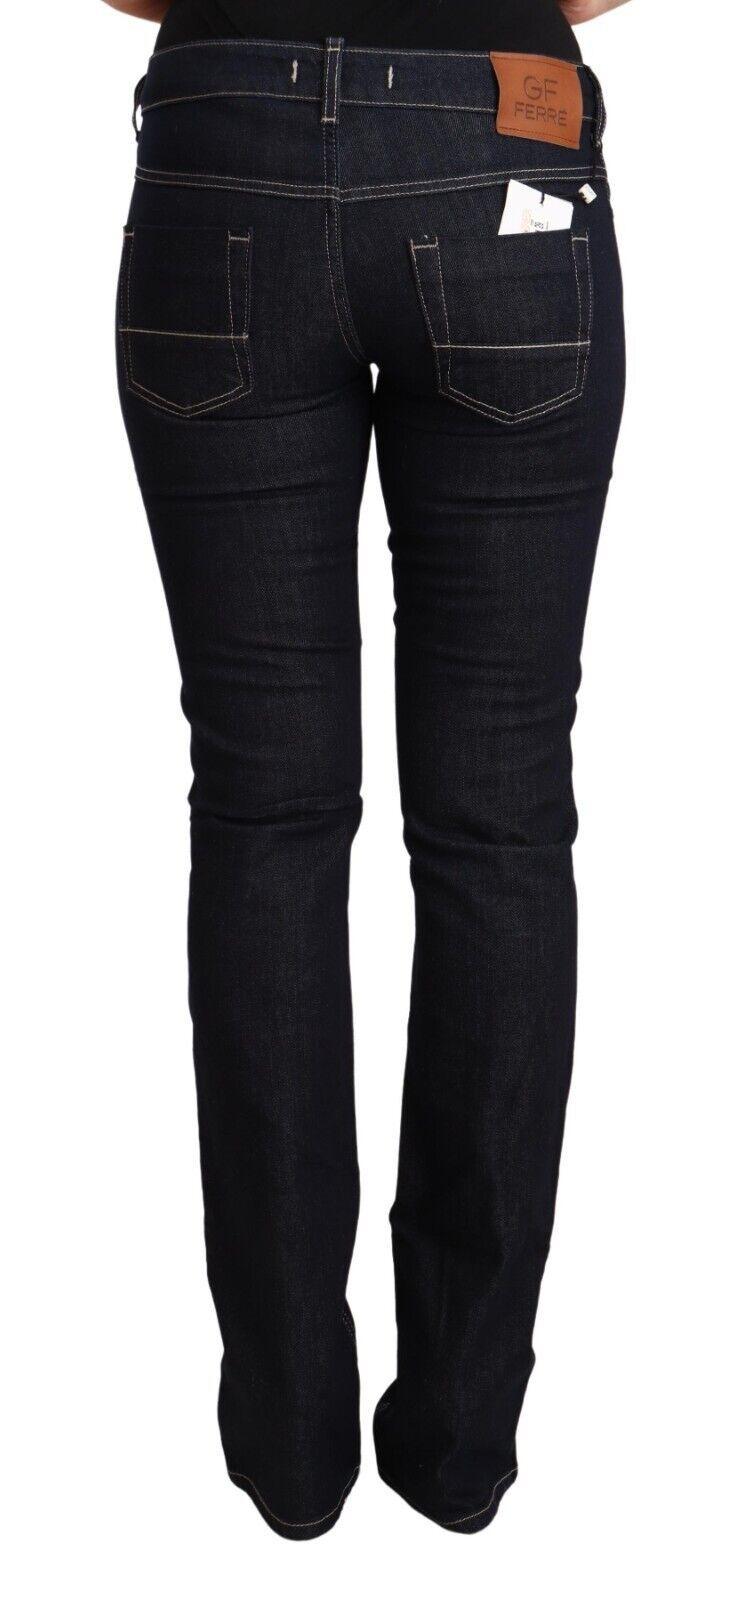 GF Ferre Ladies' Black Cotton Stretch Low Waist Skinny Denim Jeans - Designed by GF Ferre Available to Buy at a Discounted Price on Moon Behind The Hill Online Designer Discount Store